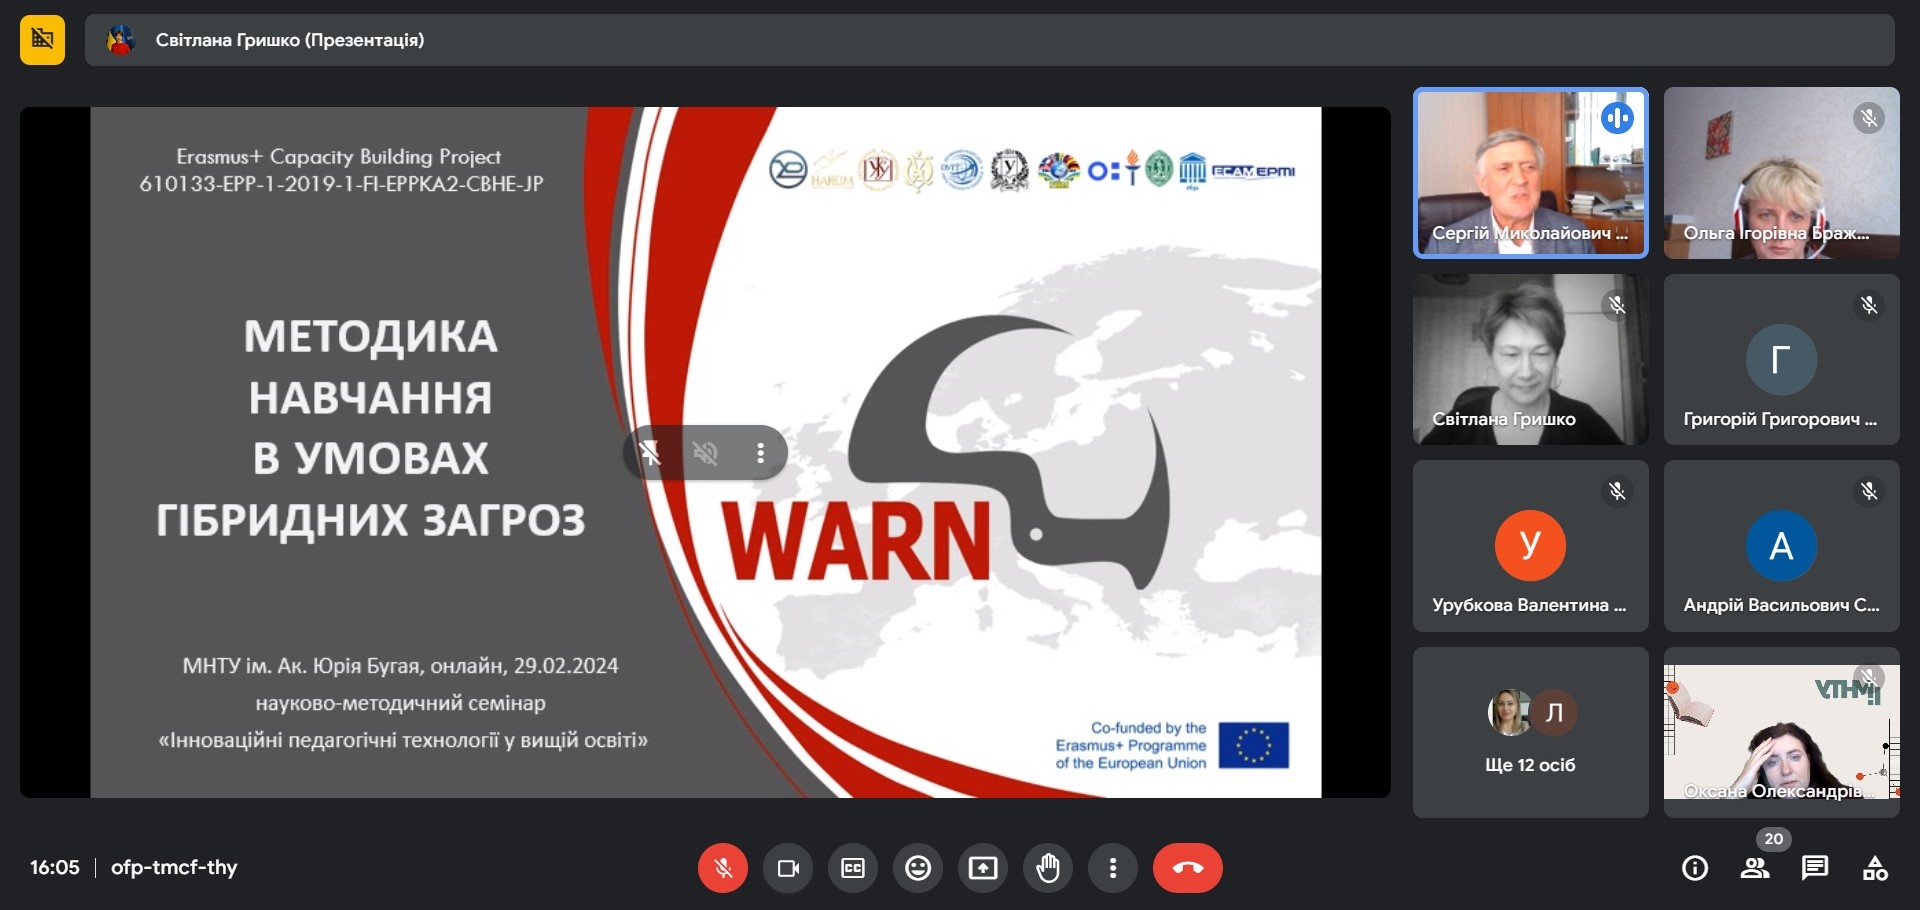 Micro Courses for Teachers are Delivered Within WARN Environment